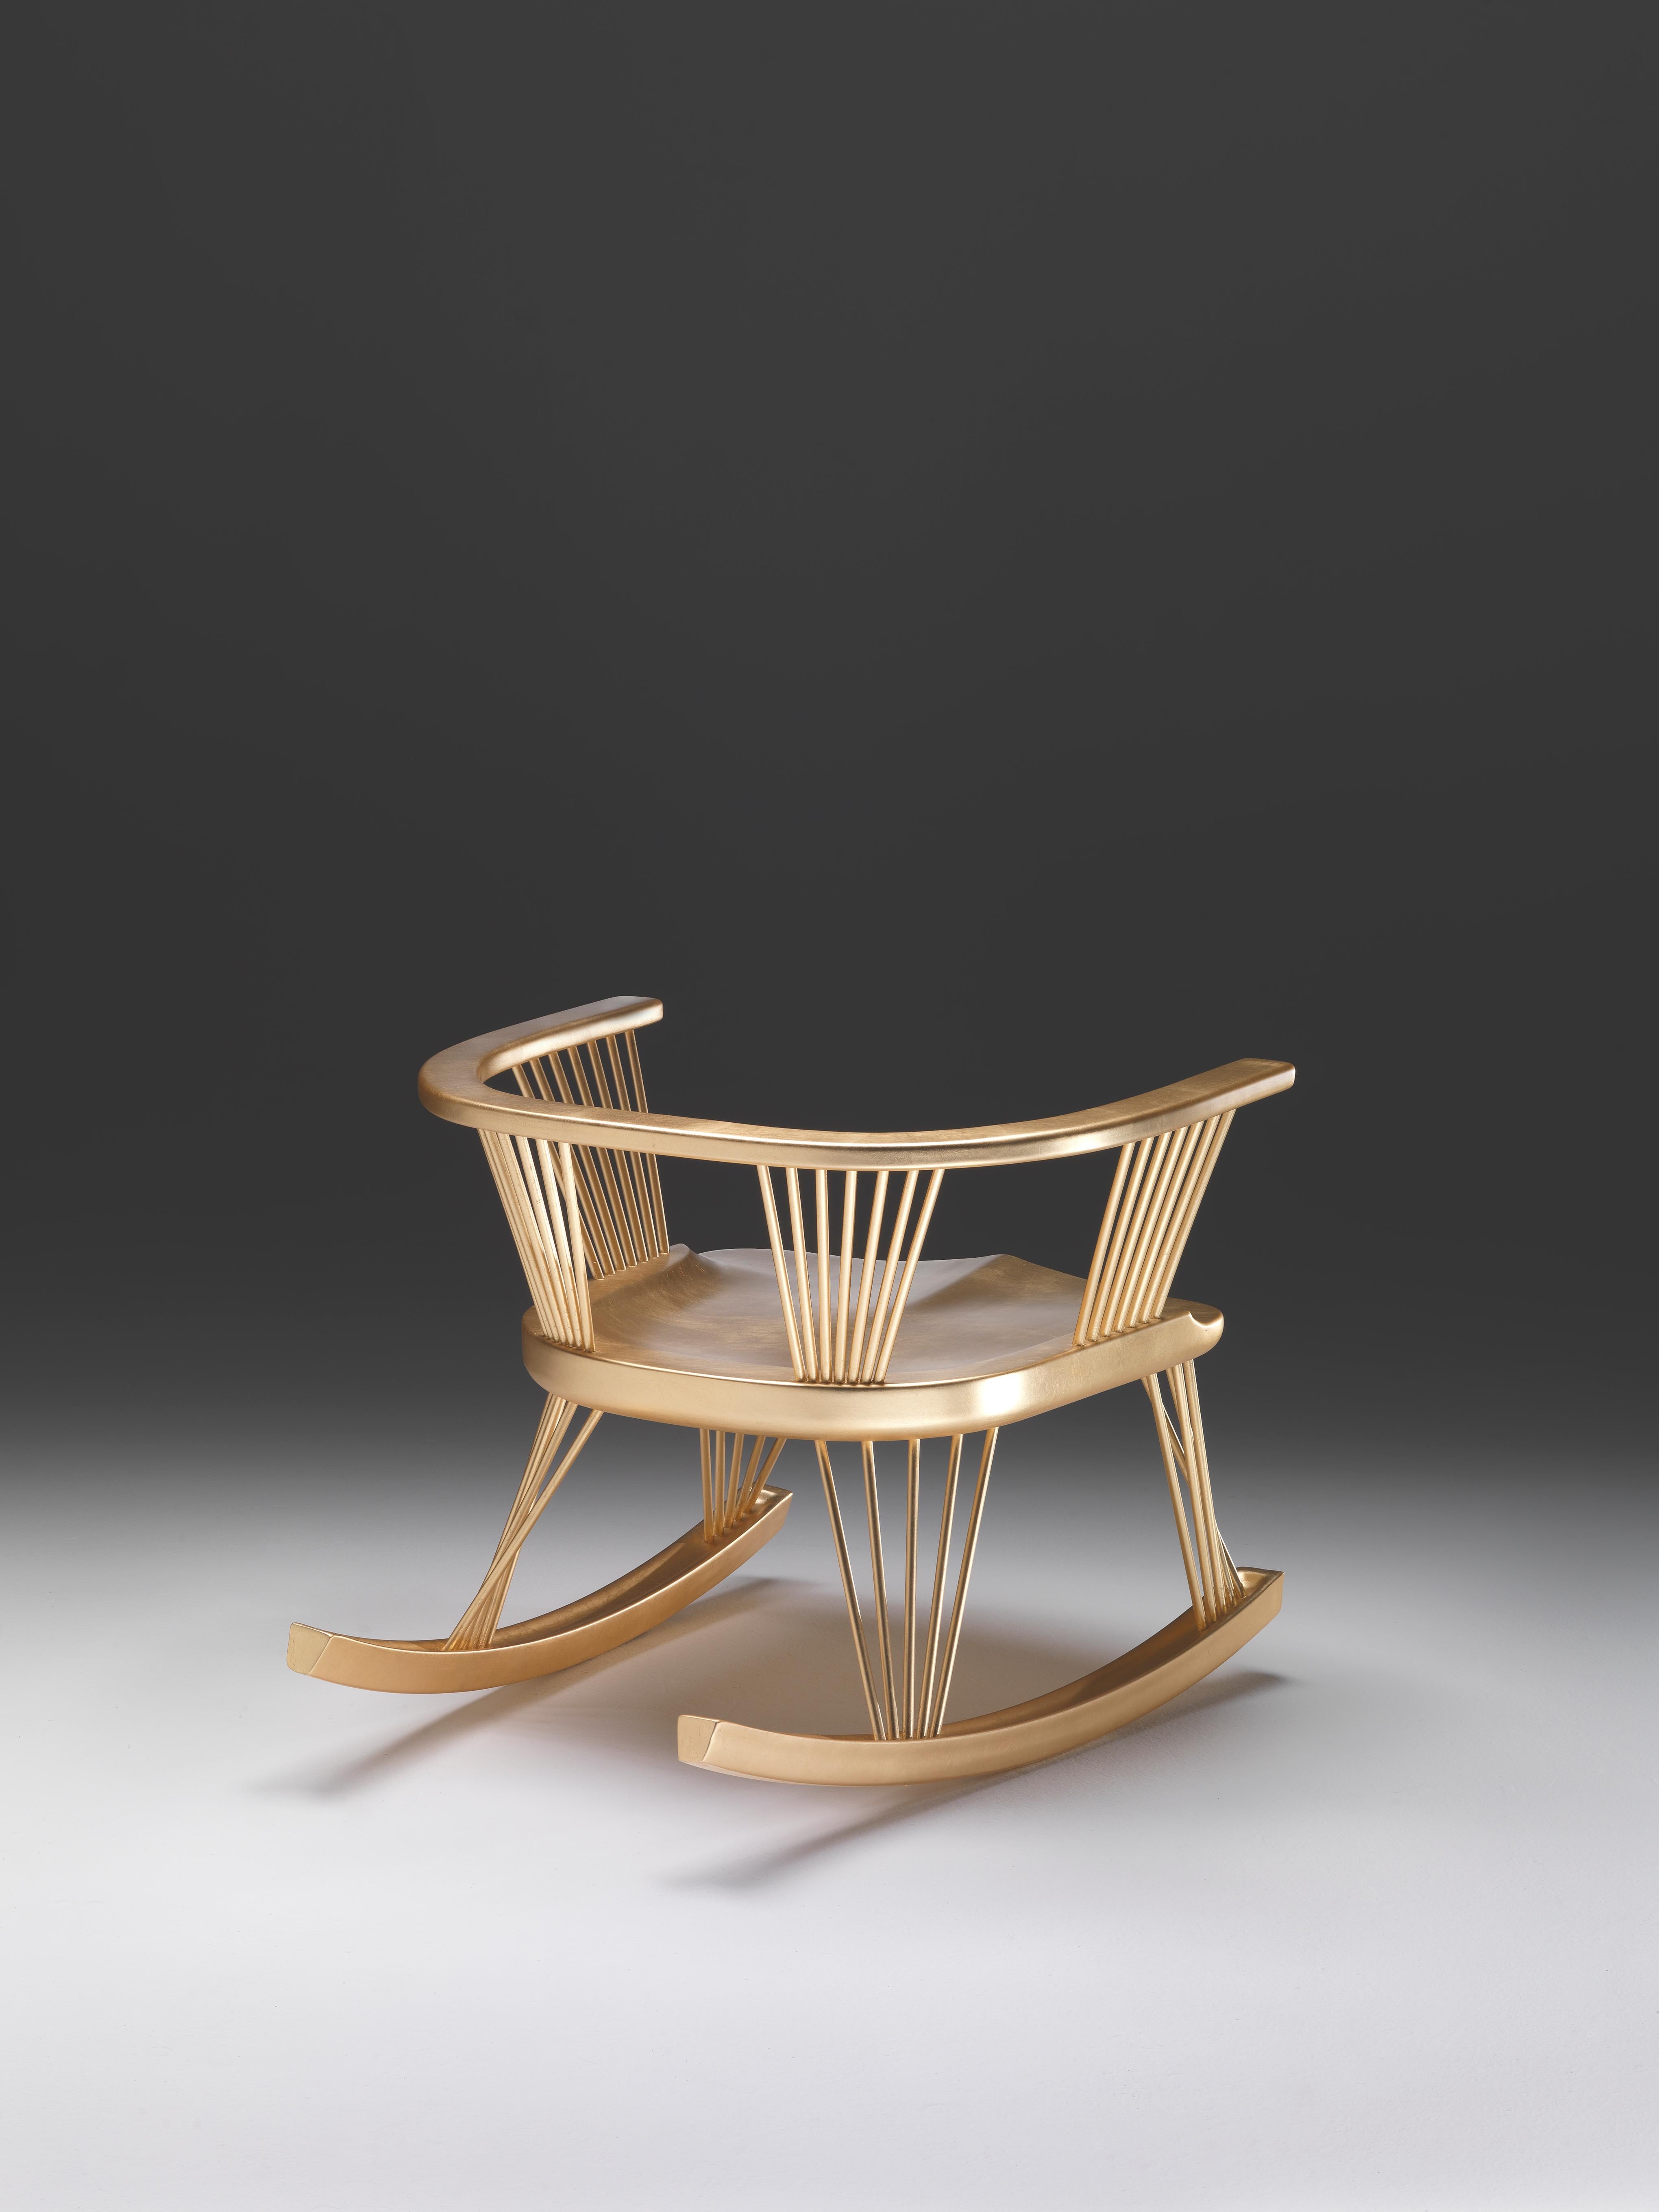 Hand-Crafted SITLALI Low Rocking Chair in Solid Wood and Thin Overlapping Road and Gold Leaf For Sale